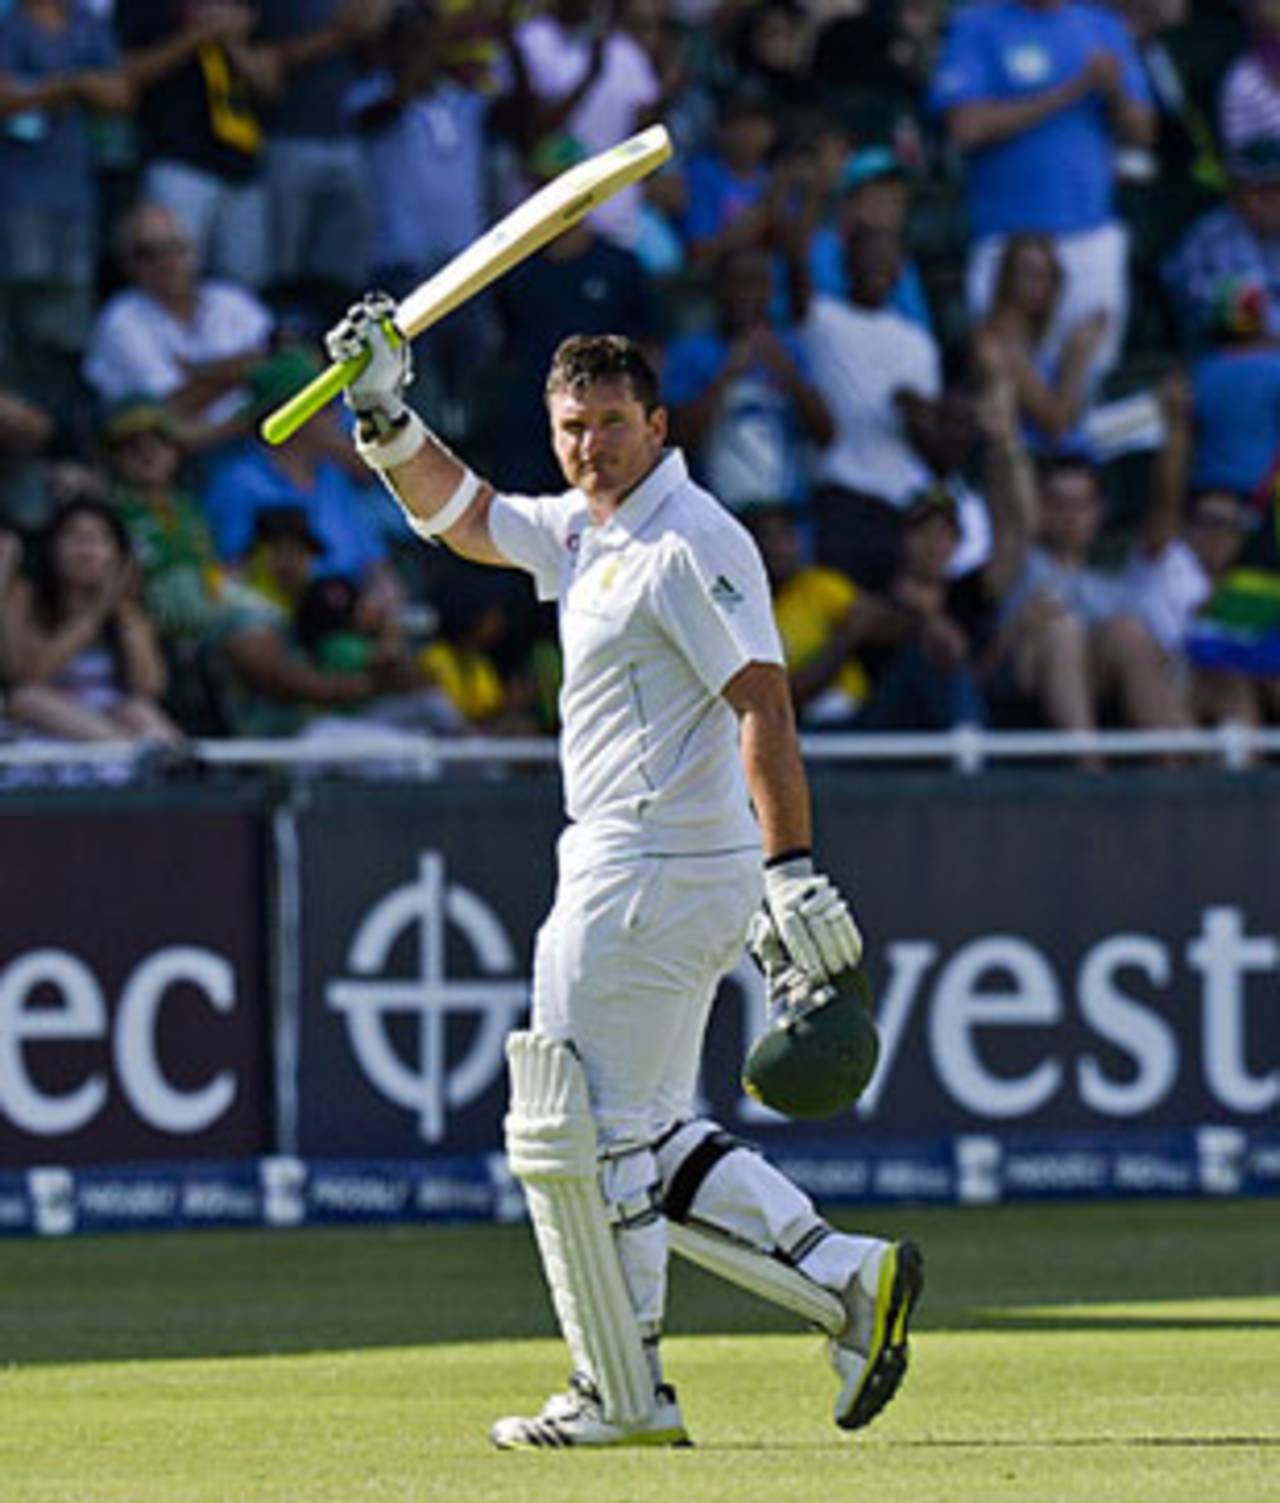 Graeme Smith scored a half-century in his 100th Test as captain, South Africa v Pakistan, 1st Test, Johannesburg, 2nd day, February 2, 2013